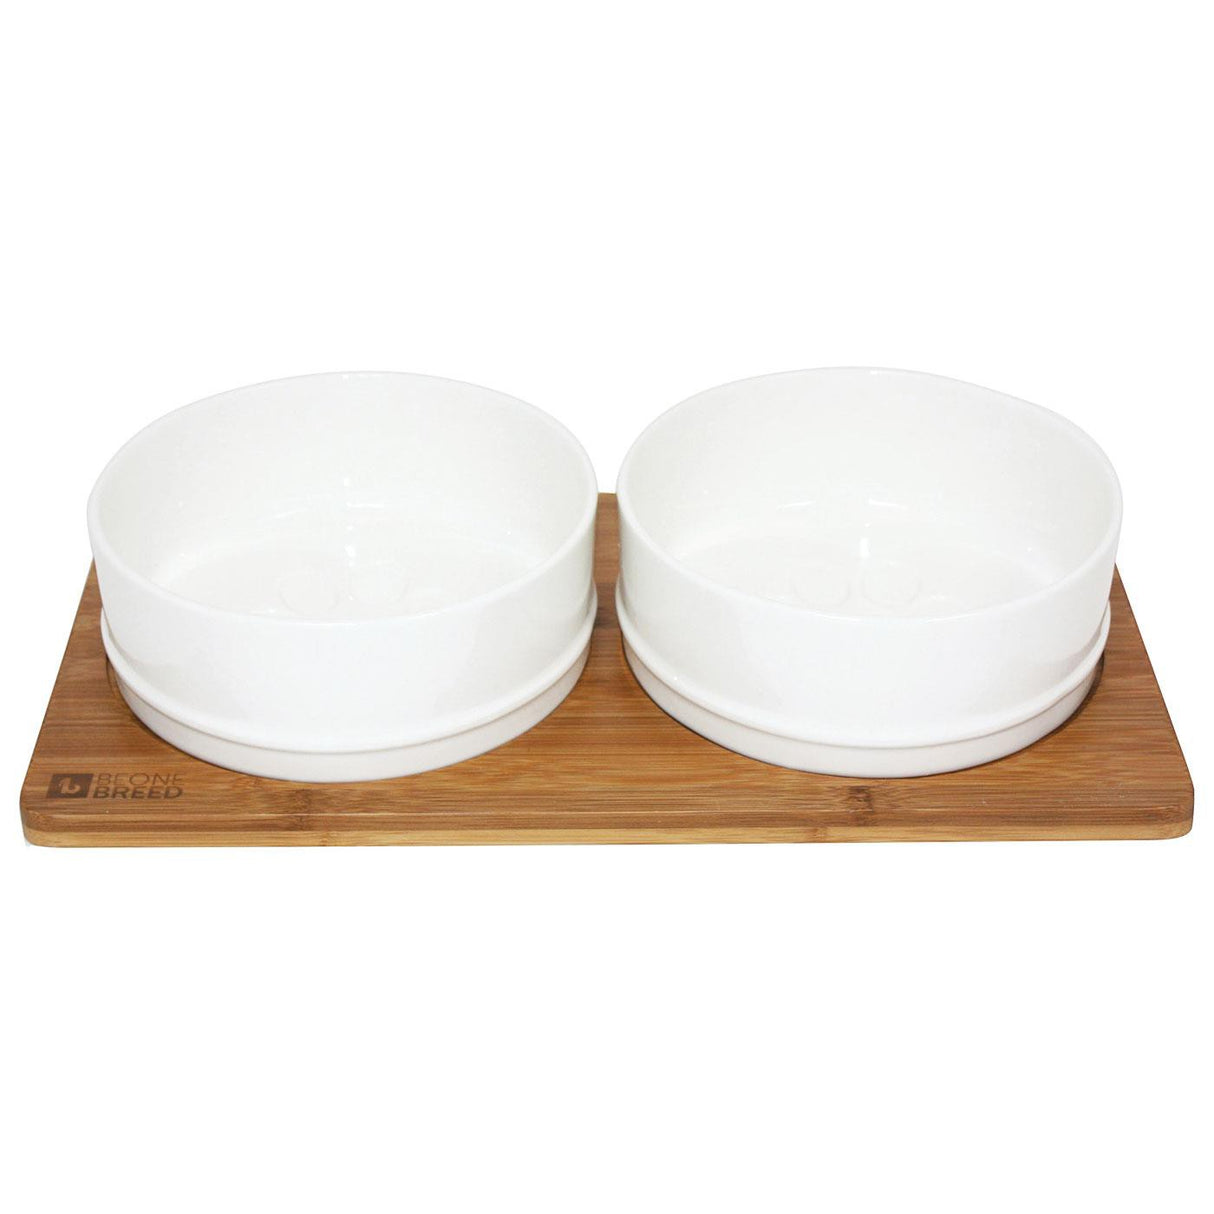 Be One Breed Bamboo Double Diner W/ Ceramic Bowls 850 mL